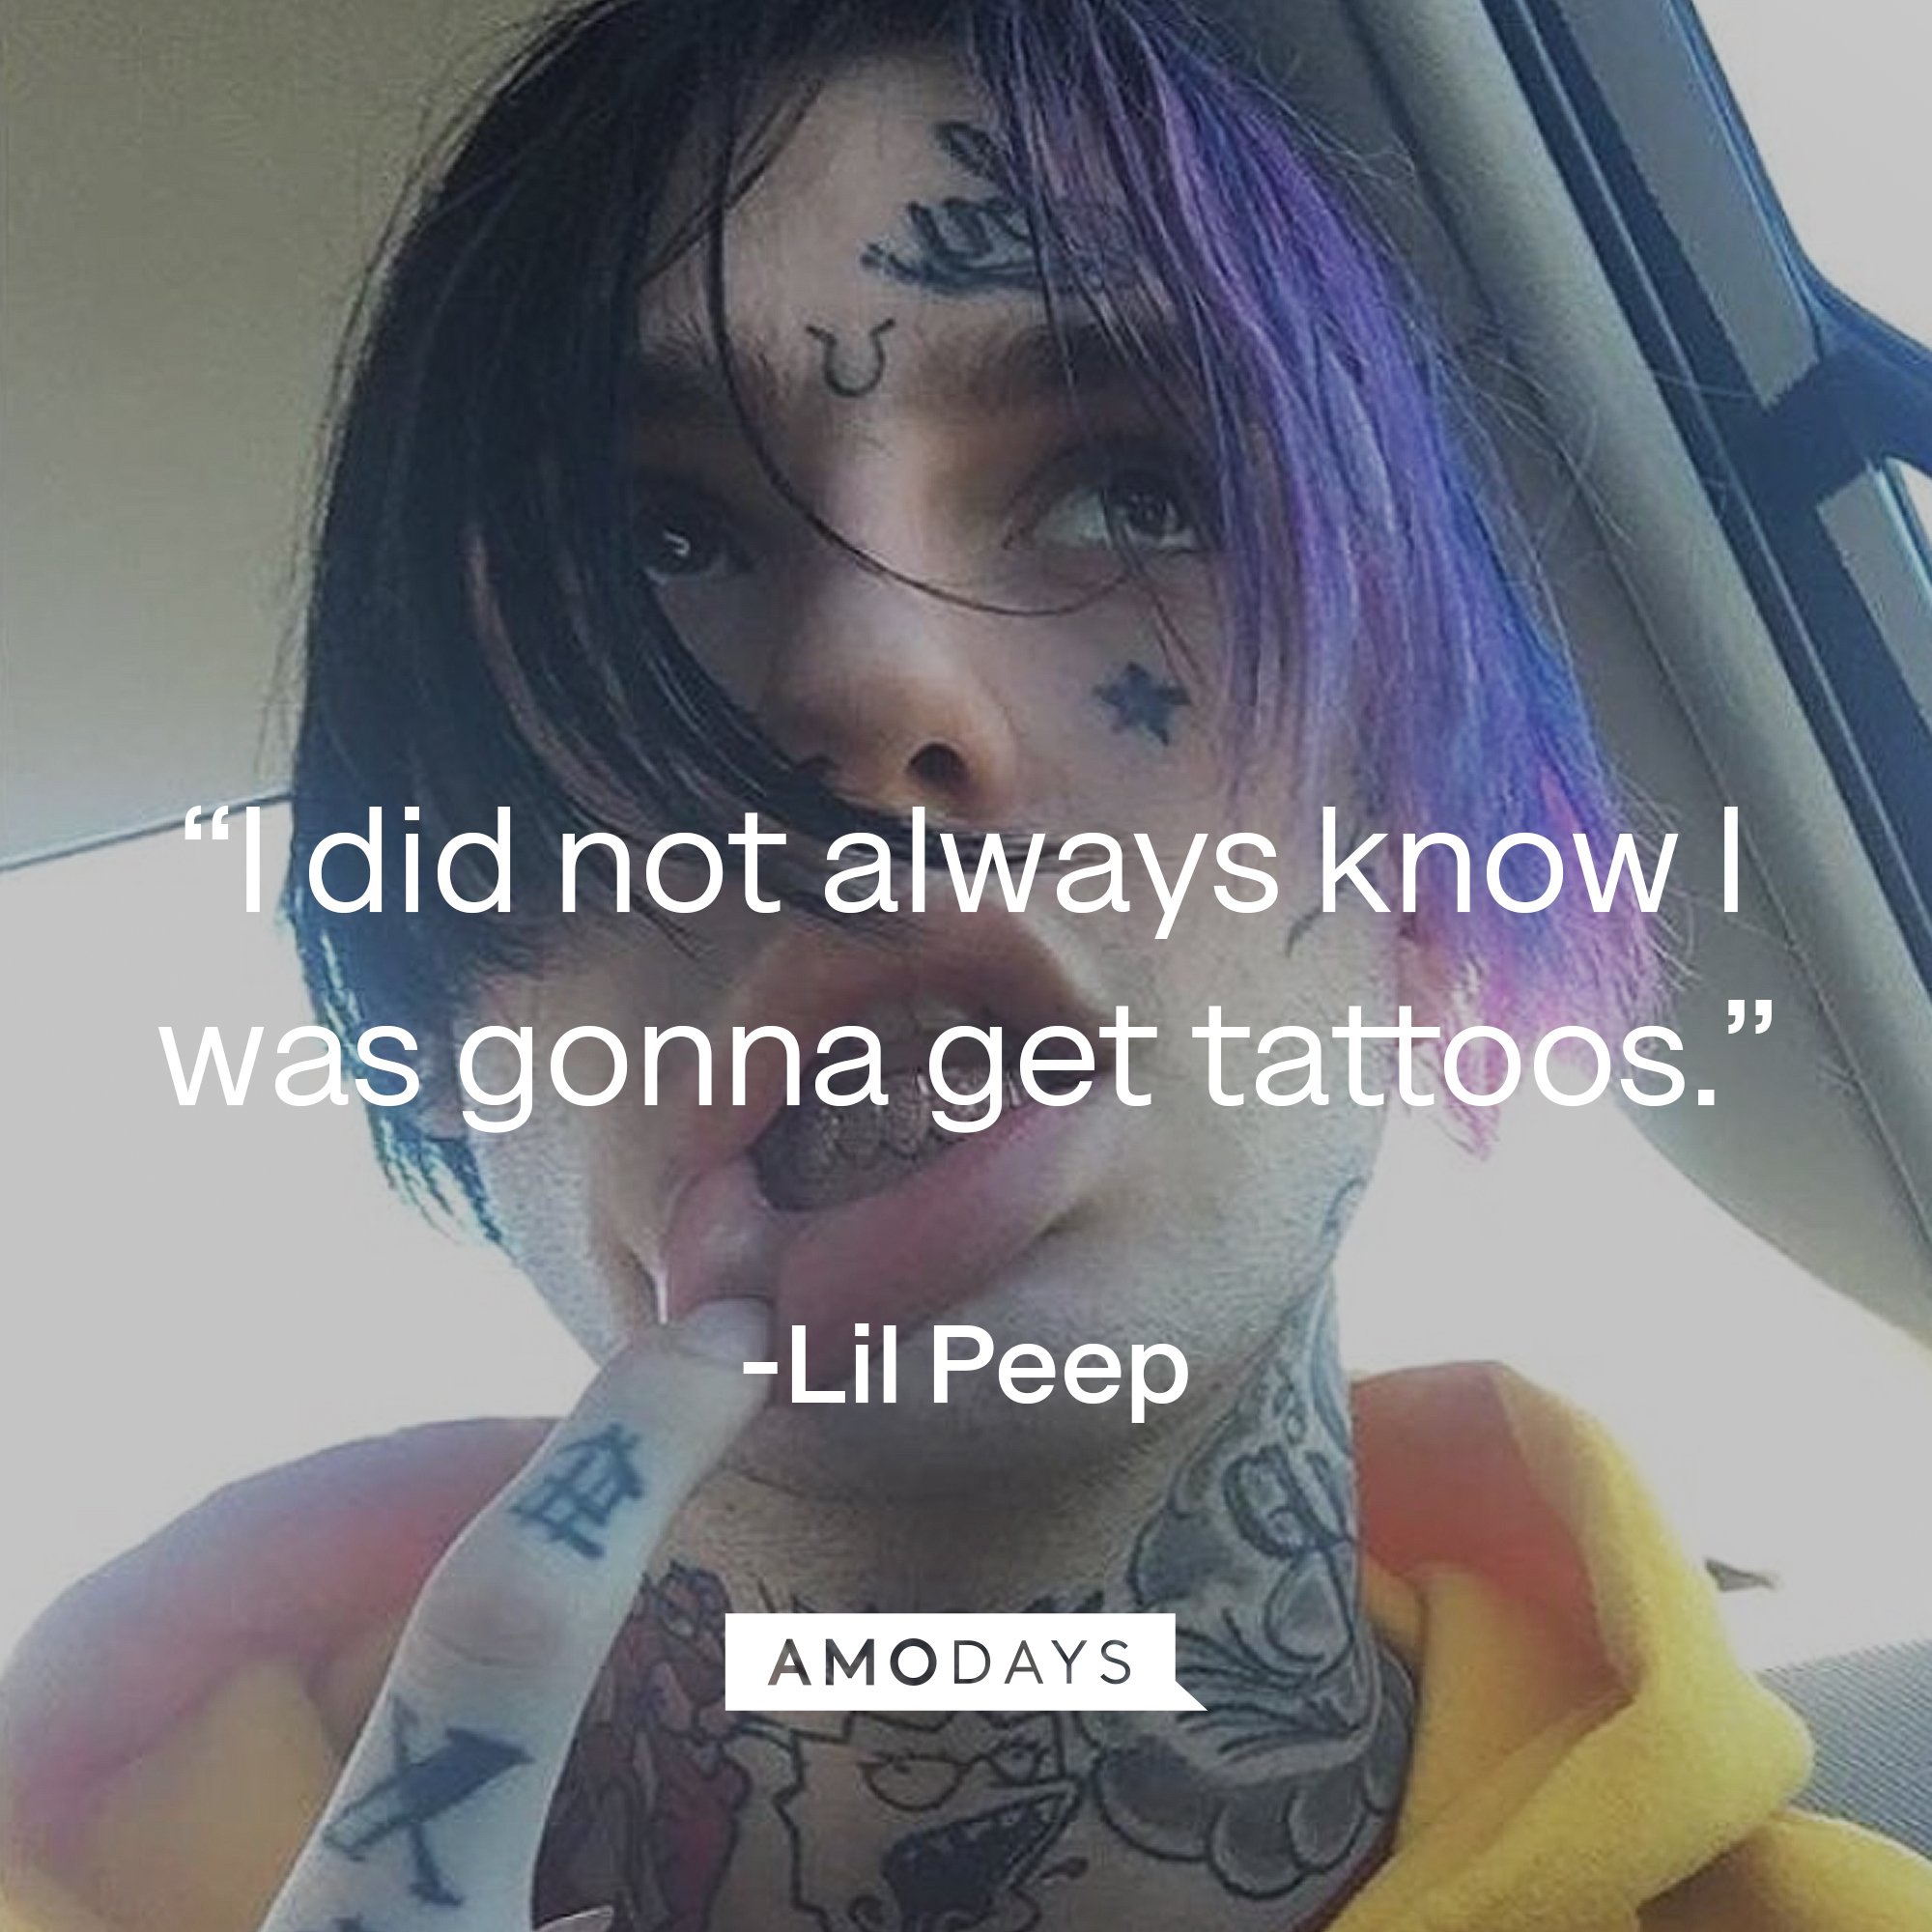 Lil peep's quote: “I did not always know I was gonna get tattoos.” | Image: AmoDays